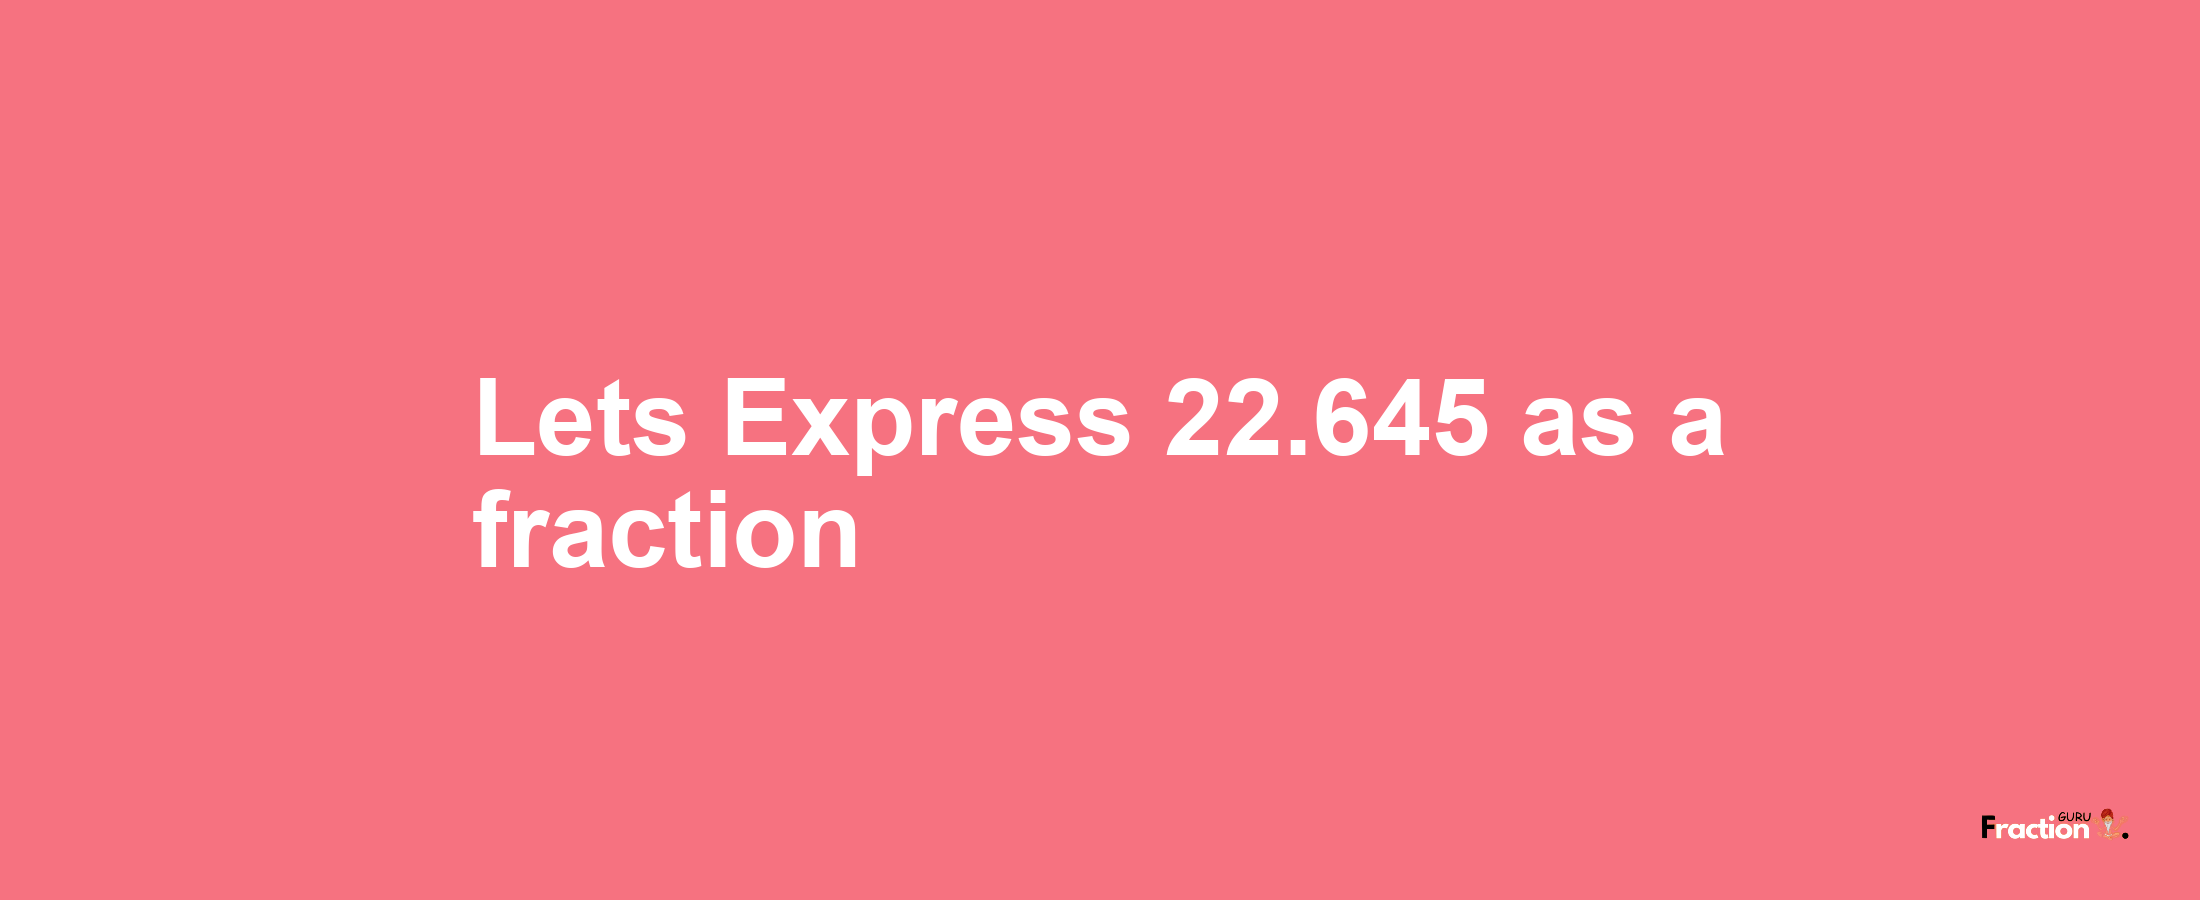 Lets Express 22.645 as afraction